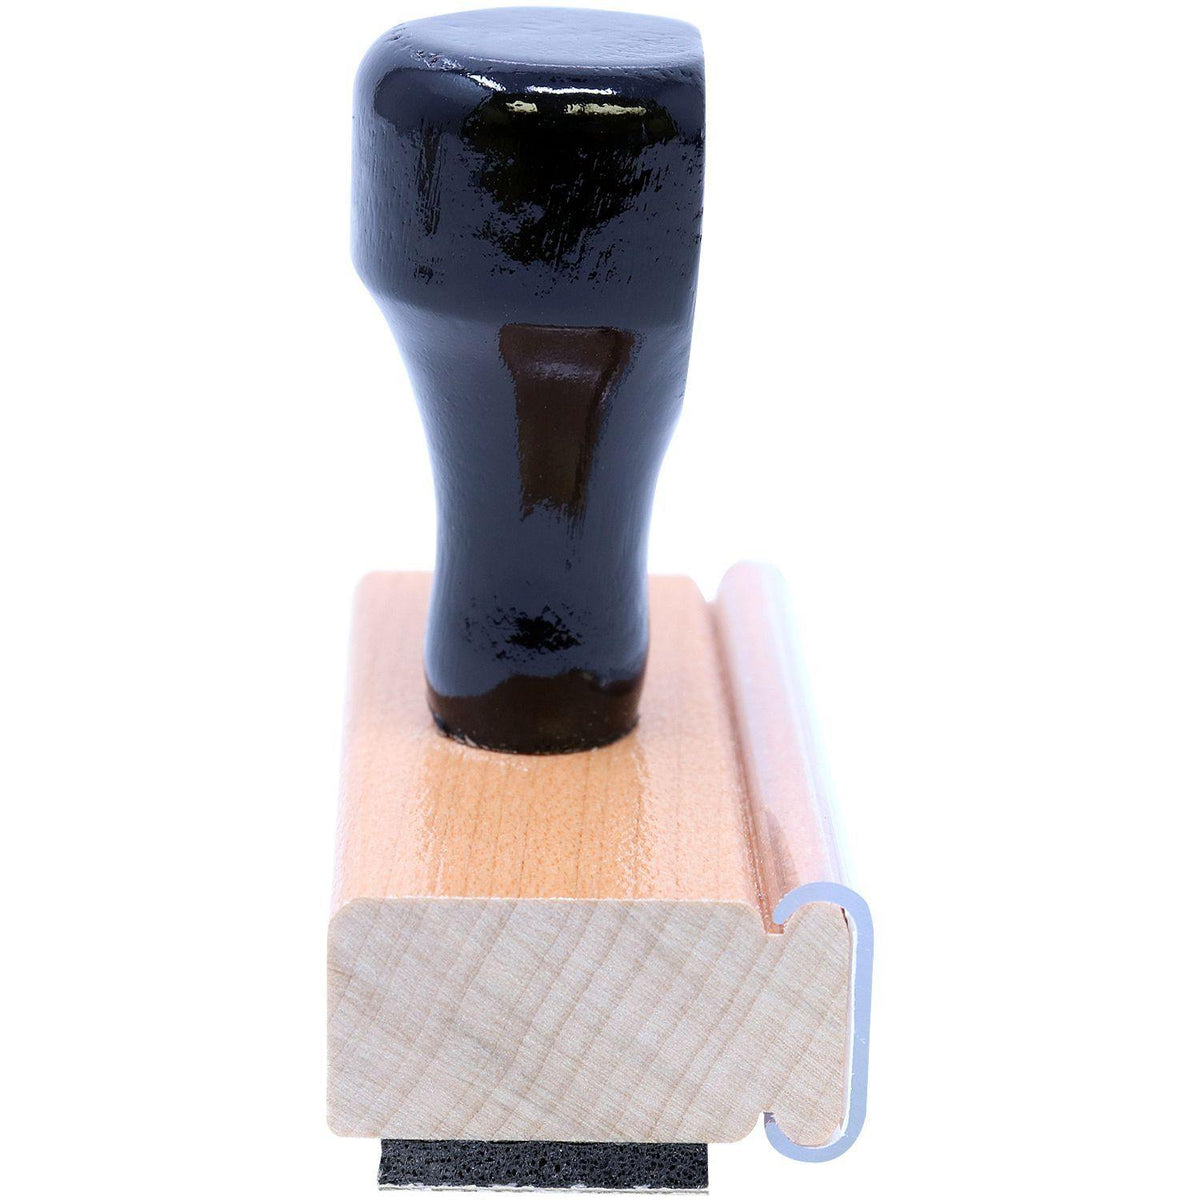 Large Trustee Exhibit Rubber Stamp - Engineer Seal Stamps - Brand_Acorn, Impression Size_Large, Stamp Type_Regular Stamp, Type of Use_Legal